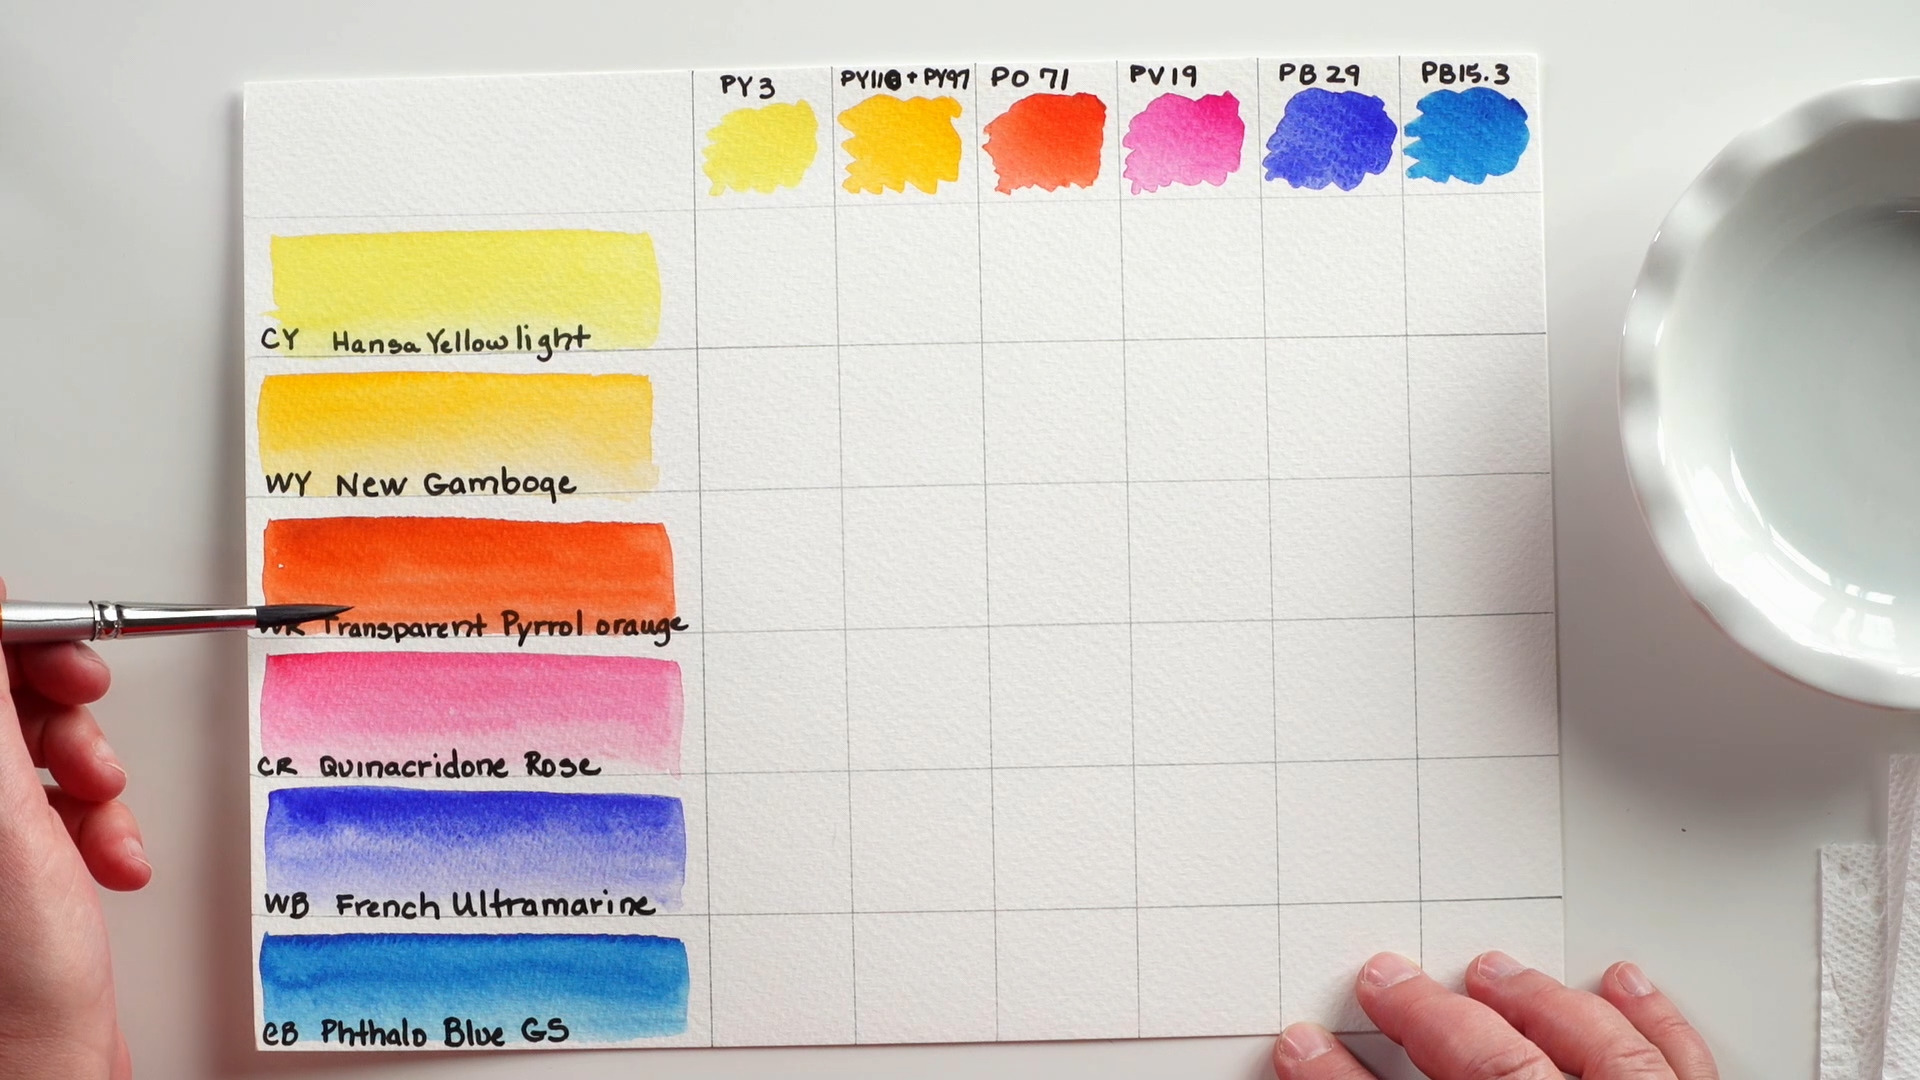 Magic Palette Color Mixing Guide - Personal Mixing Guide